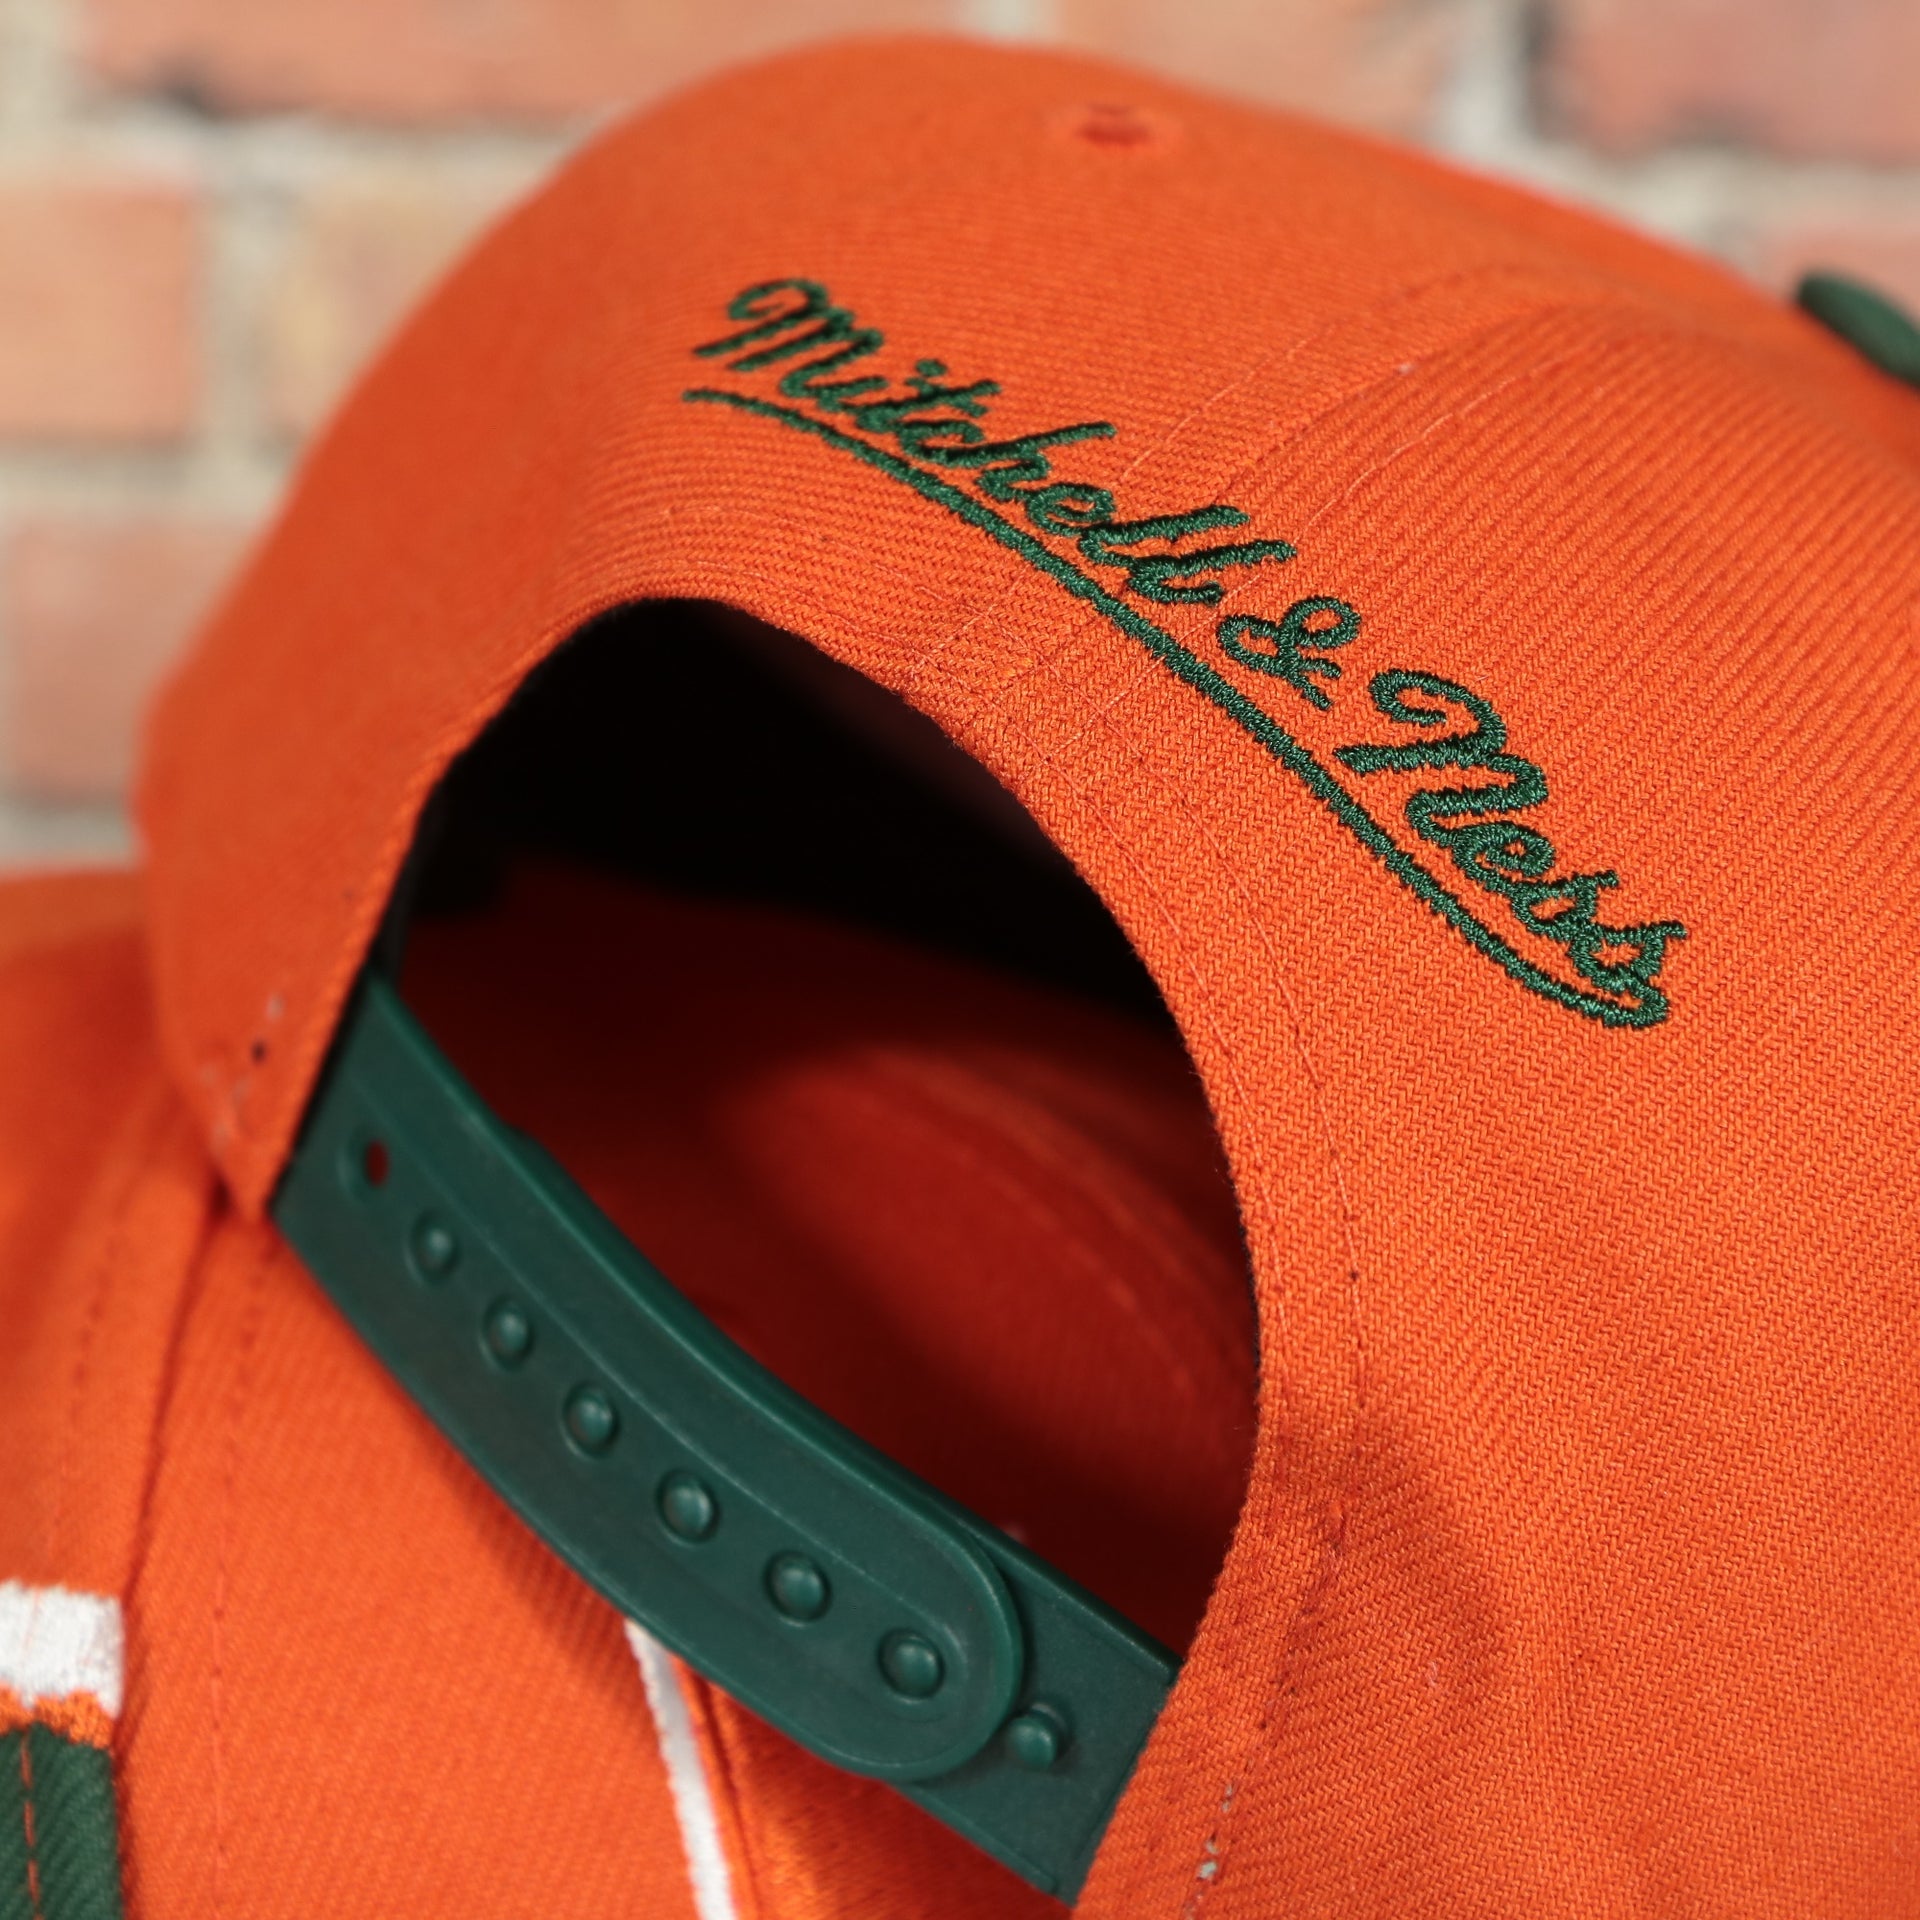 mitchell and ness logo on the Miami Hurricanes NCAA Jumbotron "U Miami" Ripped Wordmark side patch Grey Bottom Orange/Green Snapback hat | Mitchell and Ness Two Tone Snap Cap